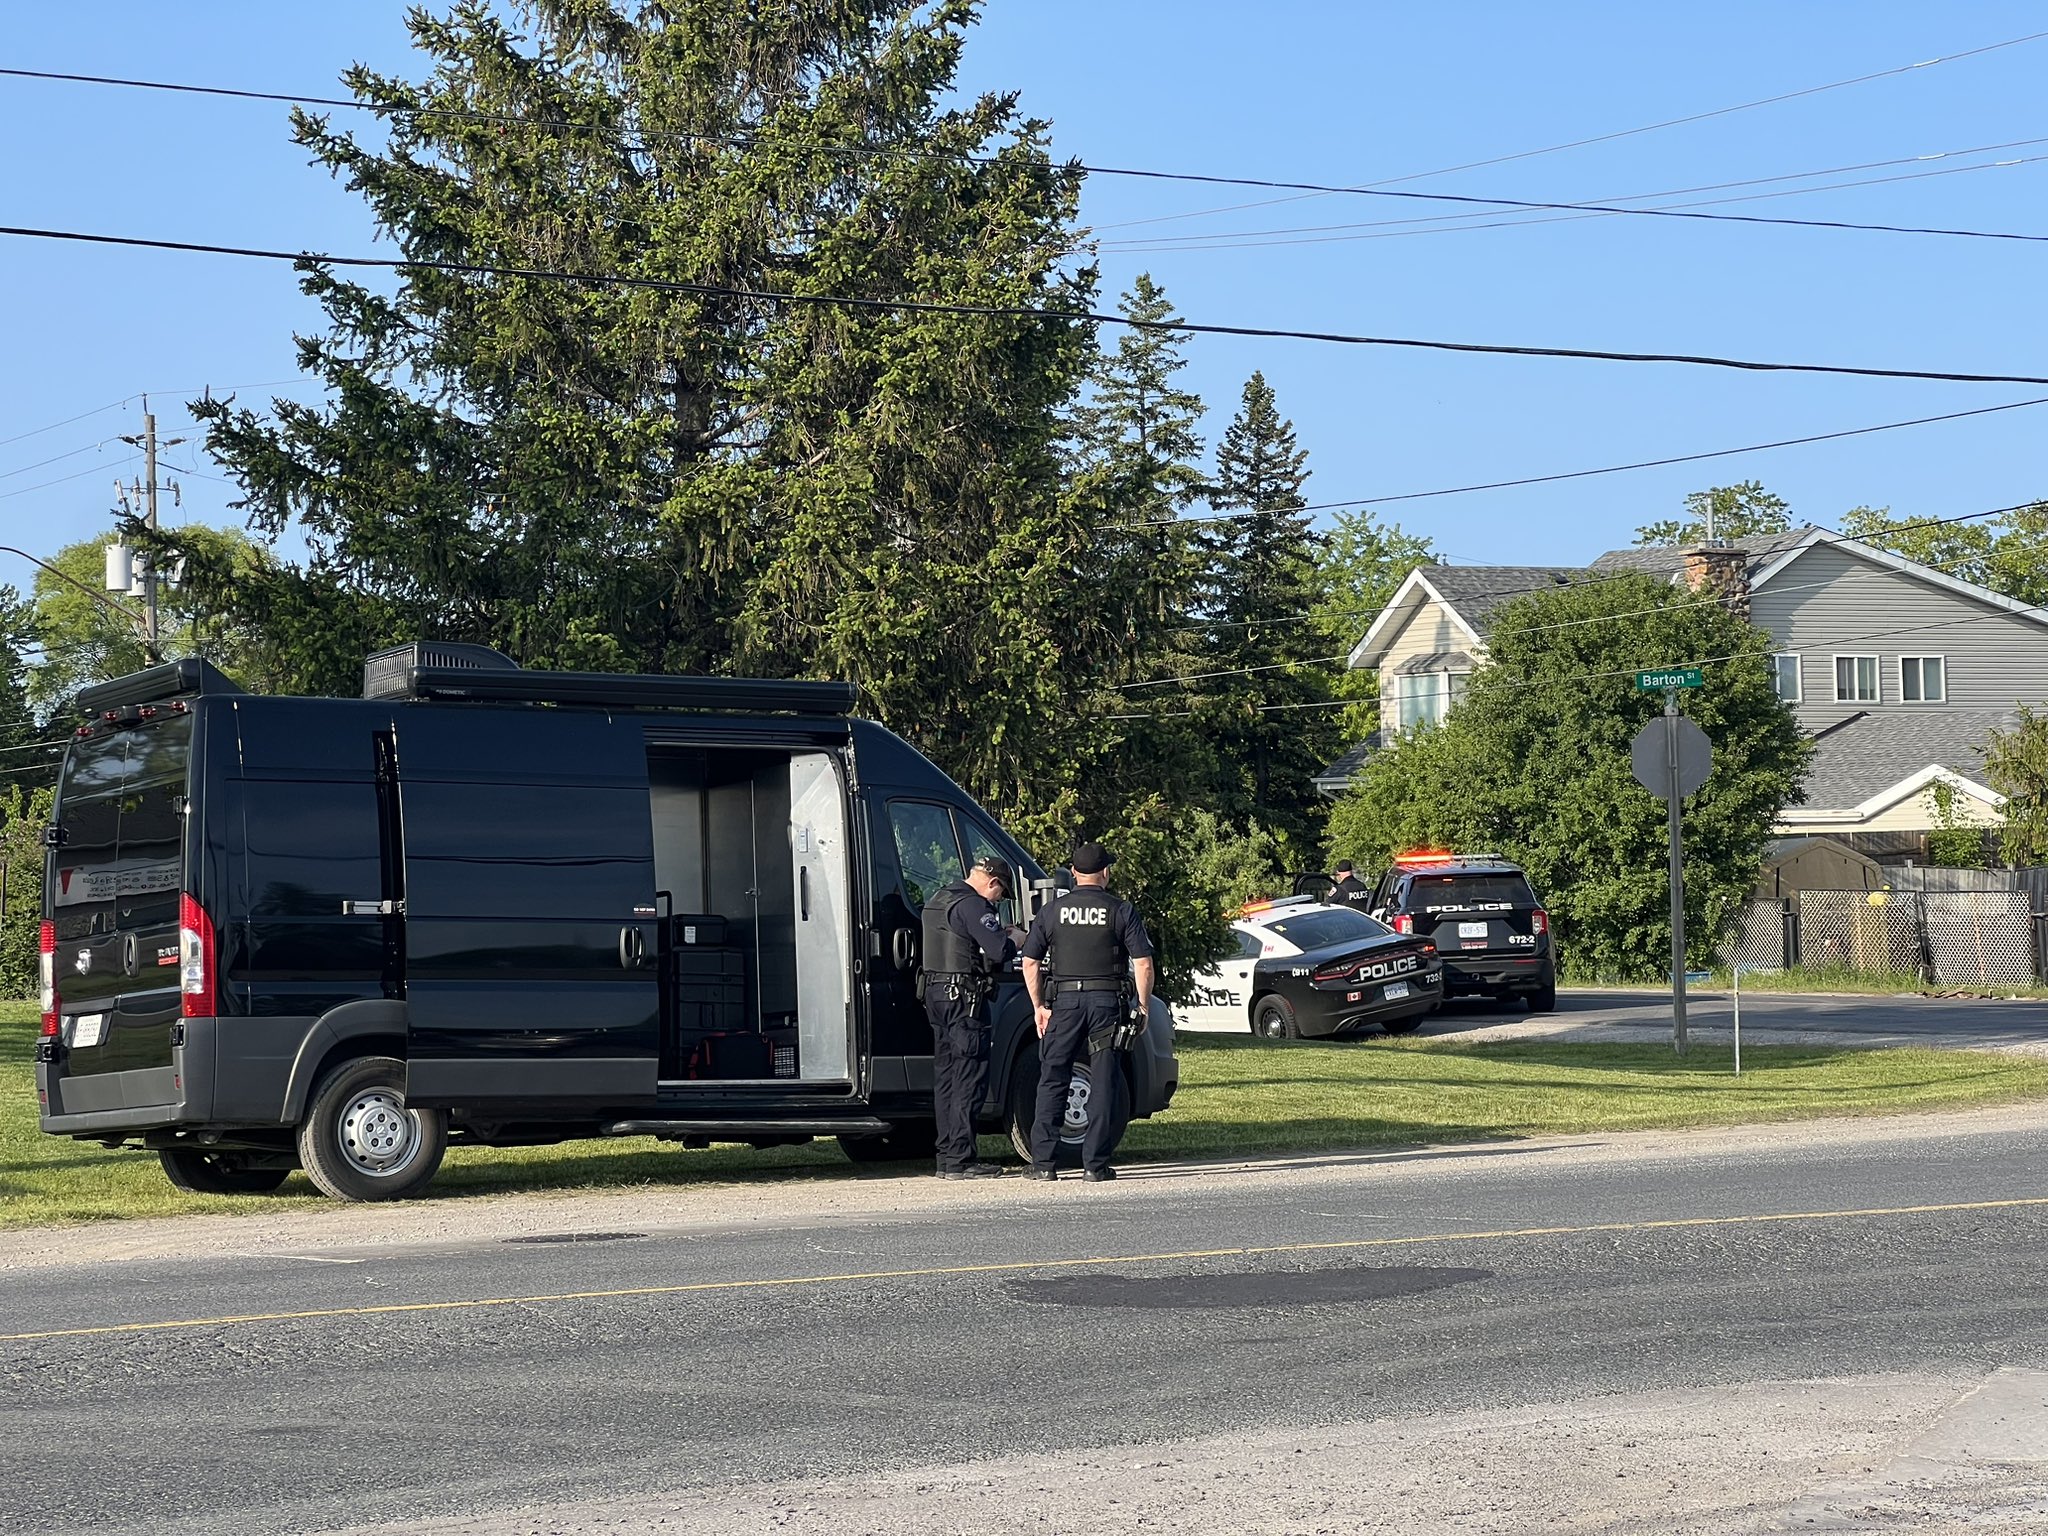 Active Shooter Incident Reported in Hamilton